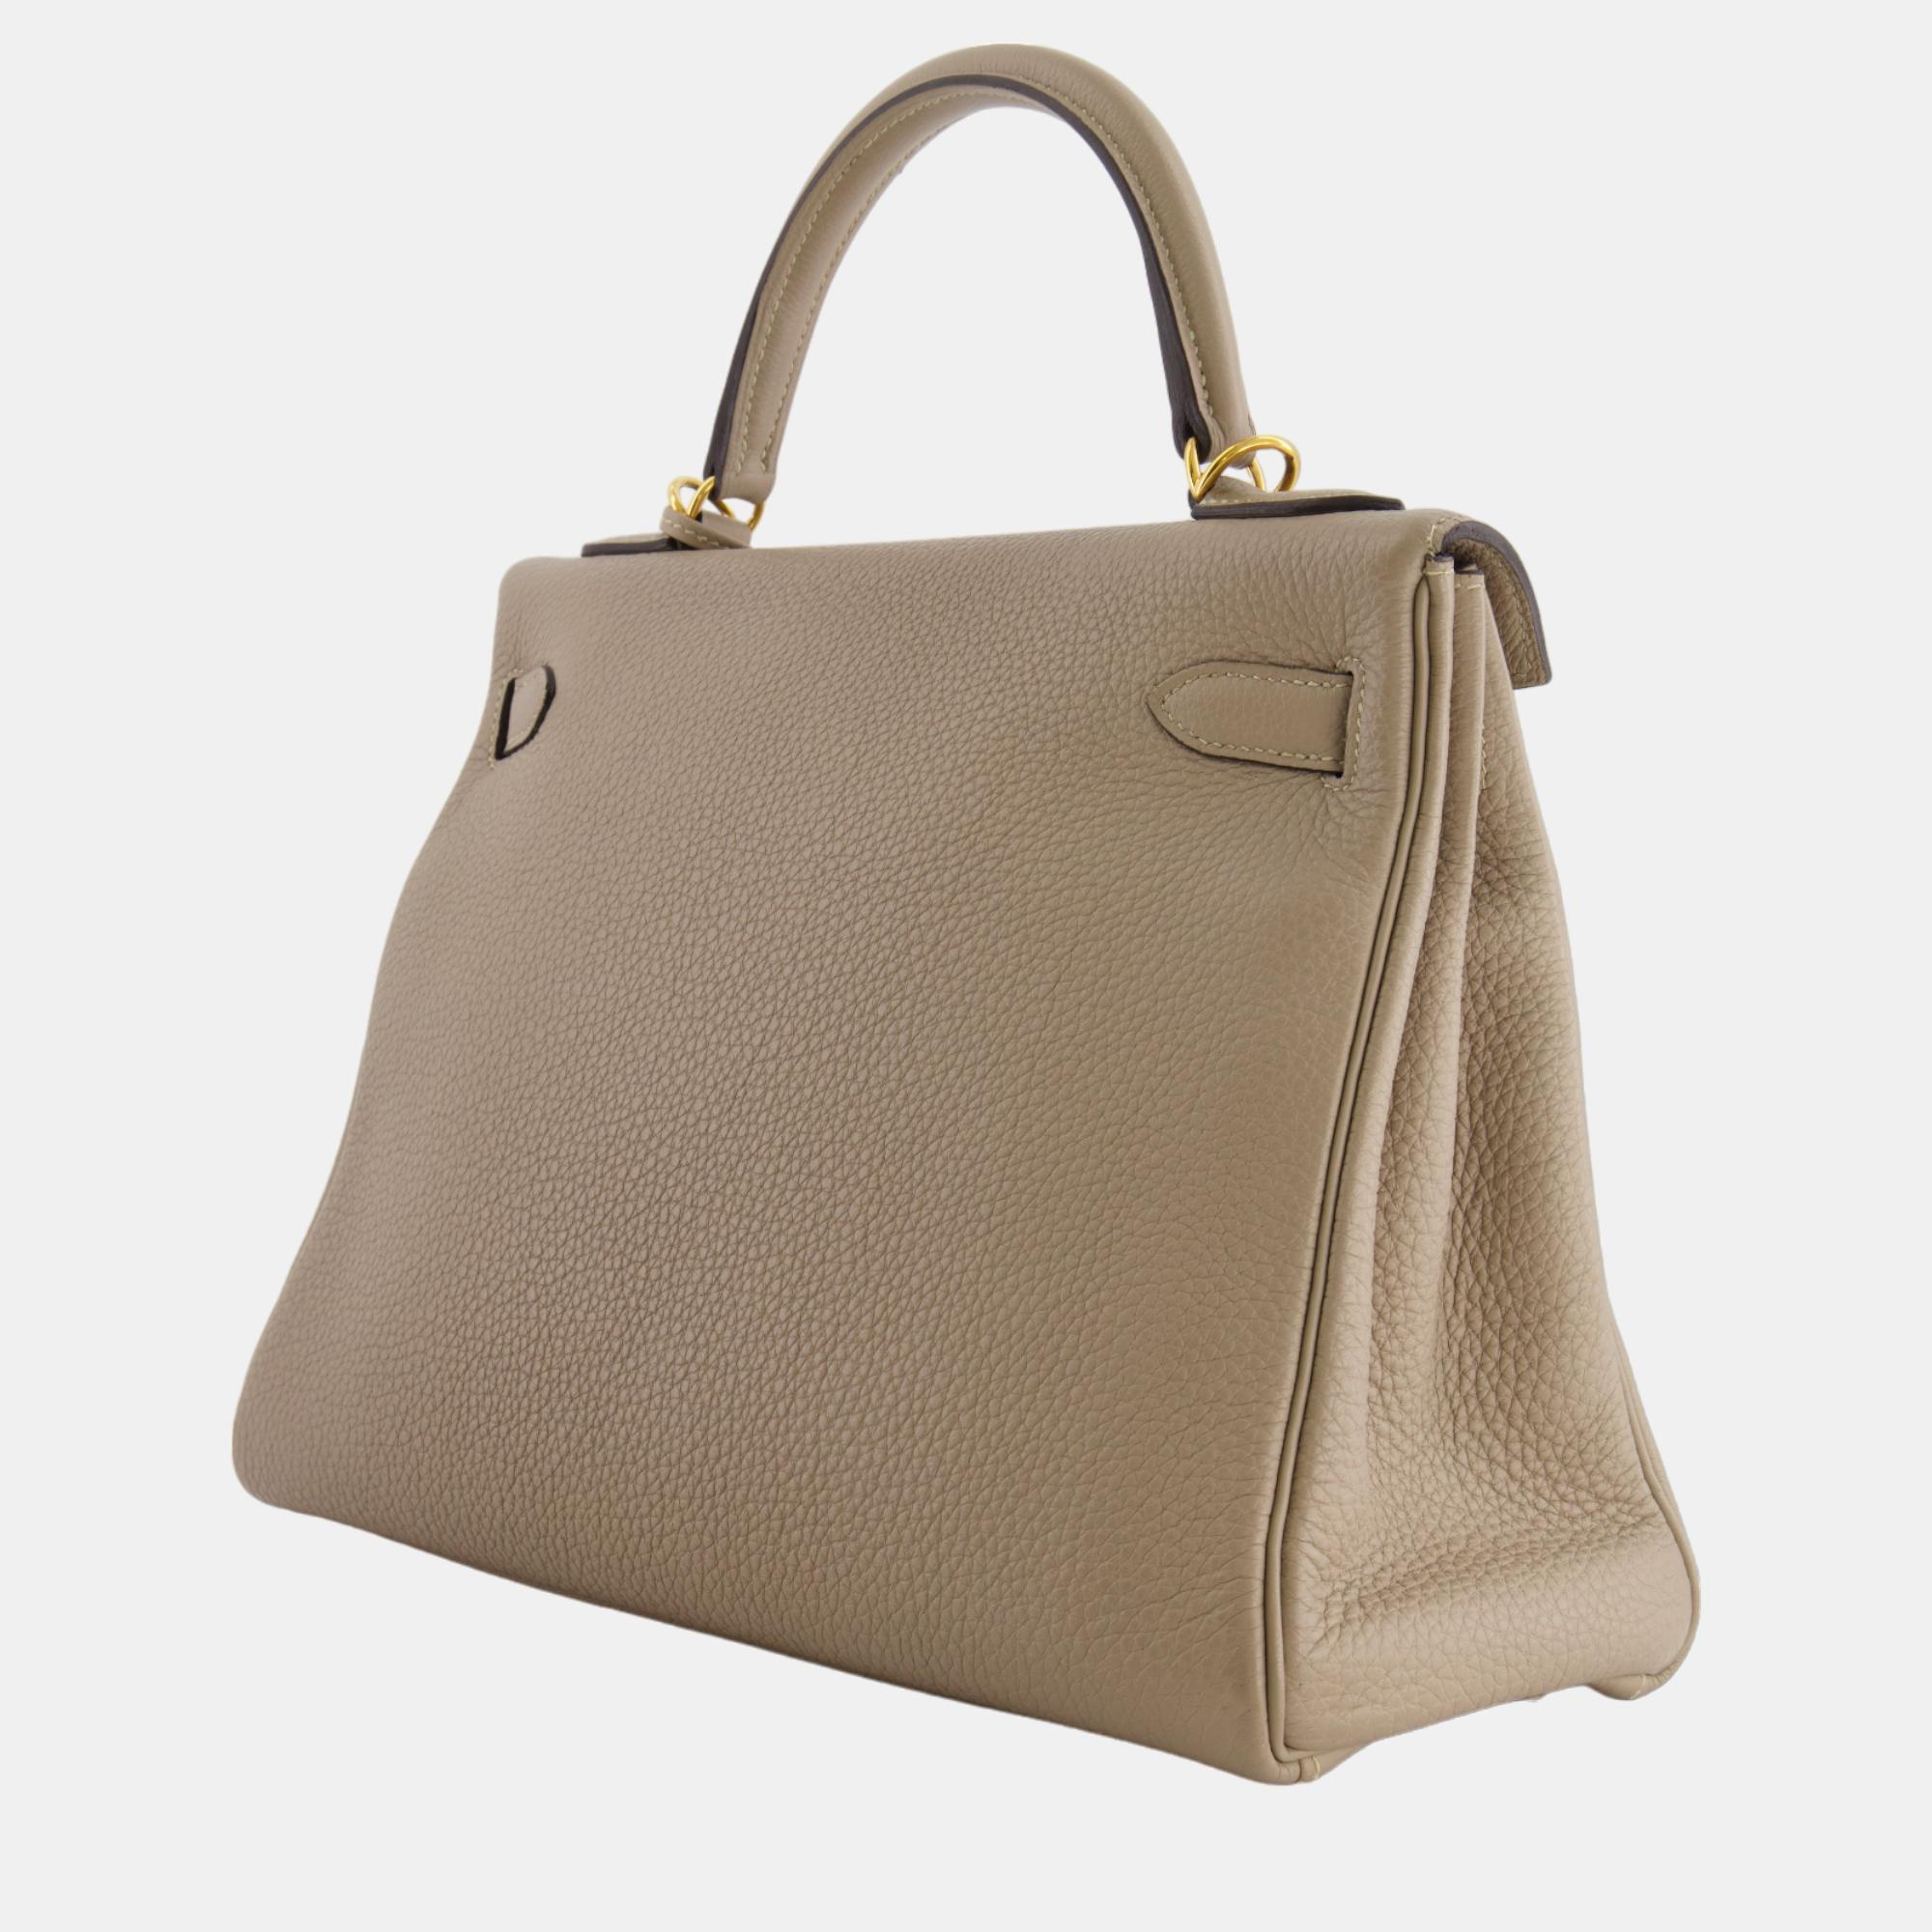 Hermes Kelly 32cm Bag In Gris Tourterelle Clemence Leather With Gold Hardware